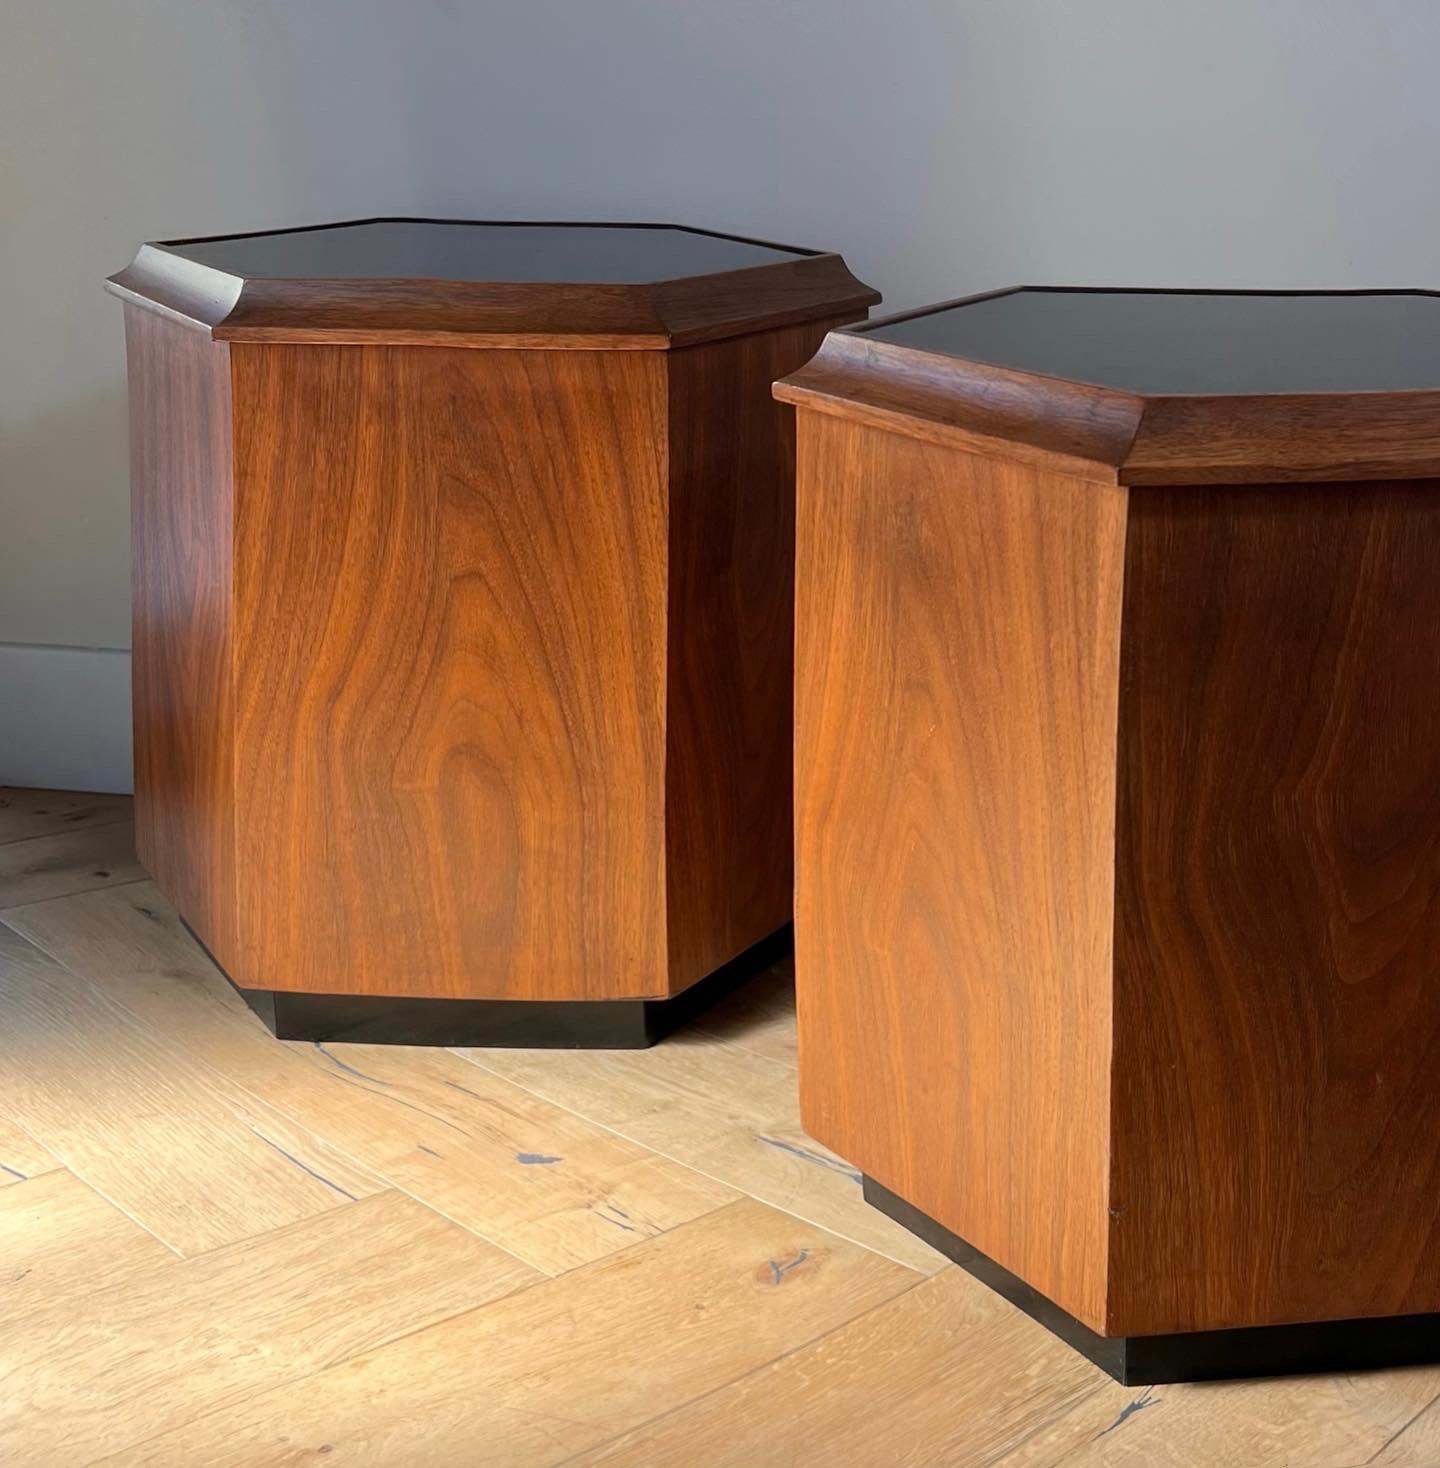 A pair of hexagonal Danish modern side tables or nightstands, 1960s. With ebonized tops and plinths, and featuring ample storage. Minor signs of age but overall fabulous condition. Pick up in central west Los Angeles or worldwide shipping